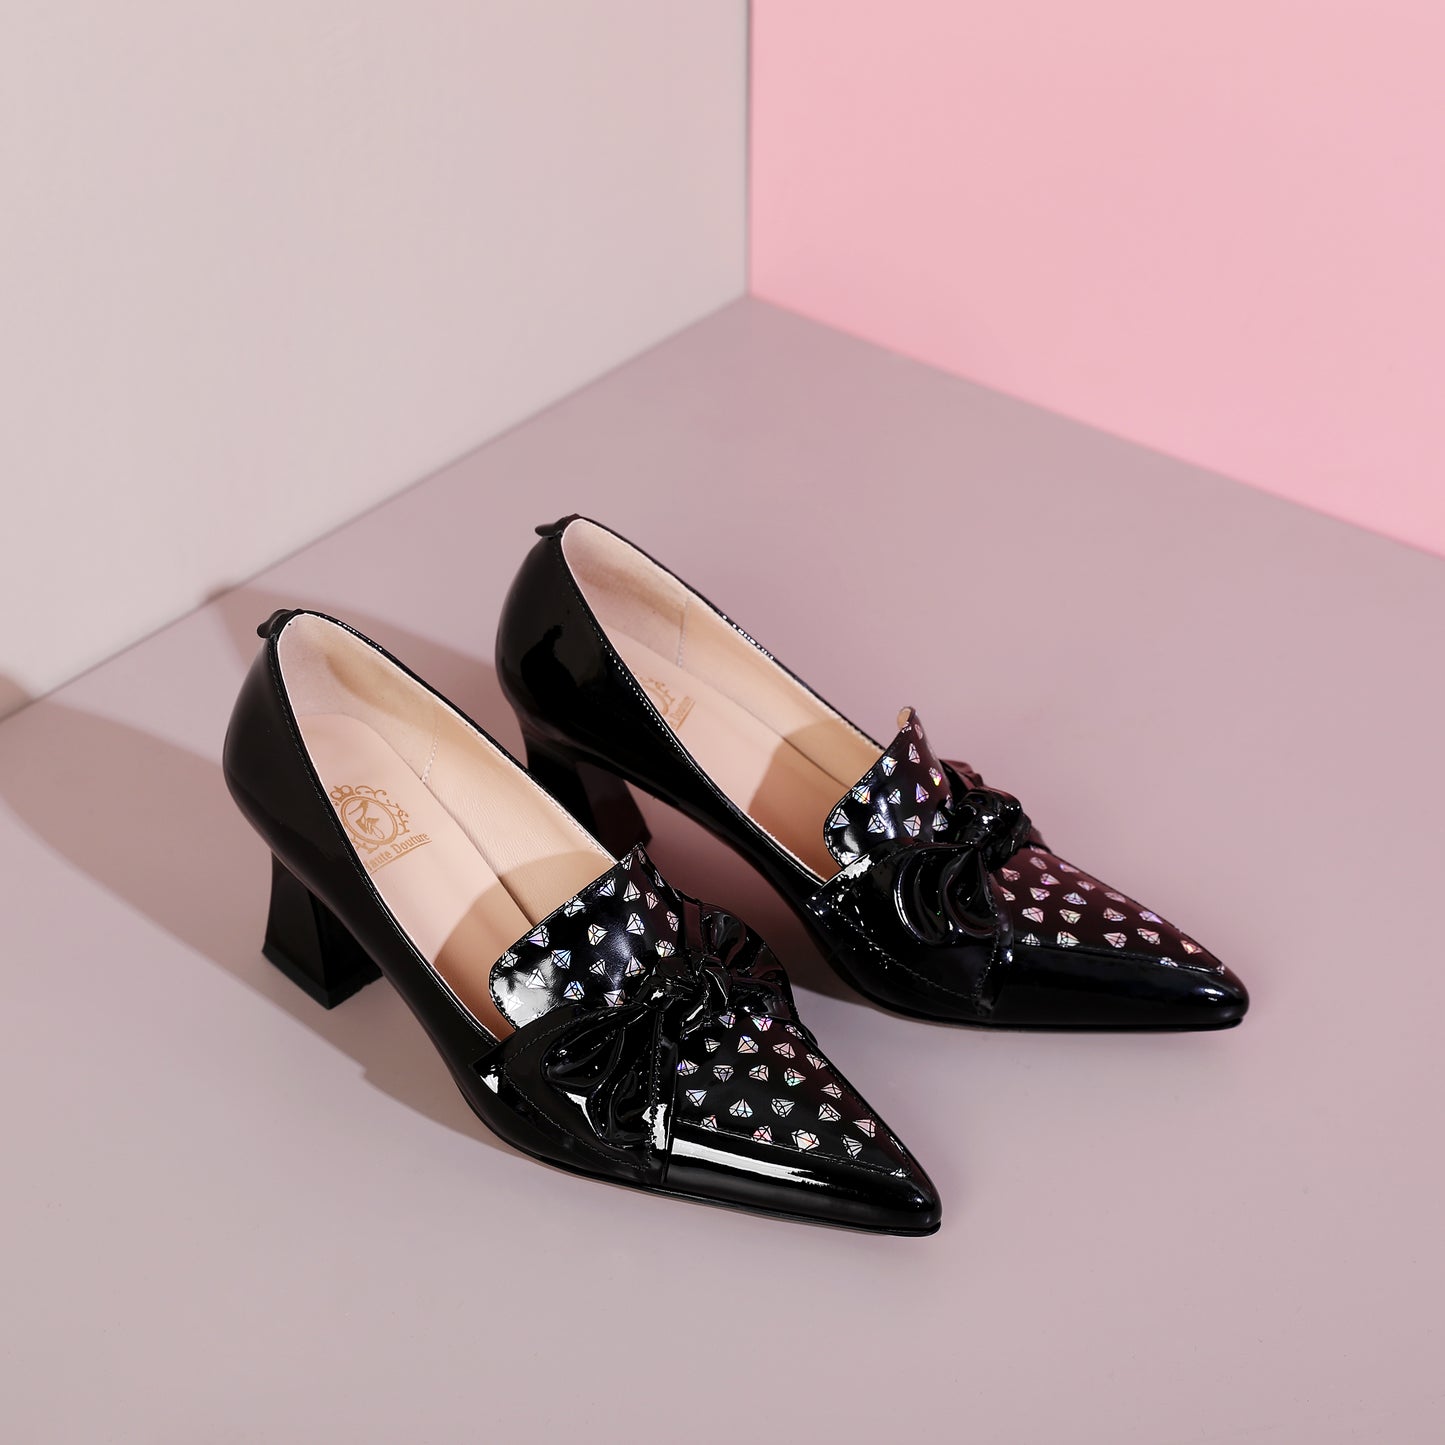 TinaCus Glossy Patent Leather Women's Handmade Pointed Toe Dots Decor Spool Heel Pumps with Bowknot